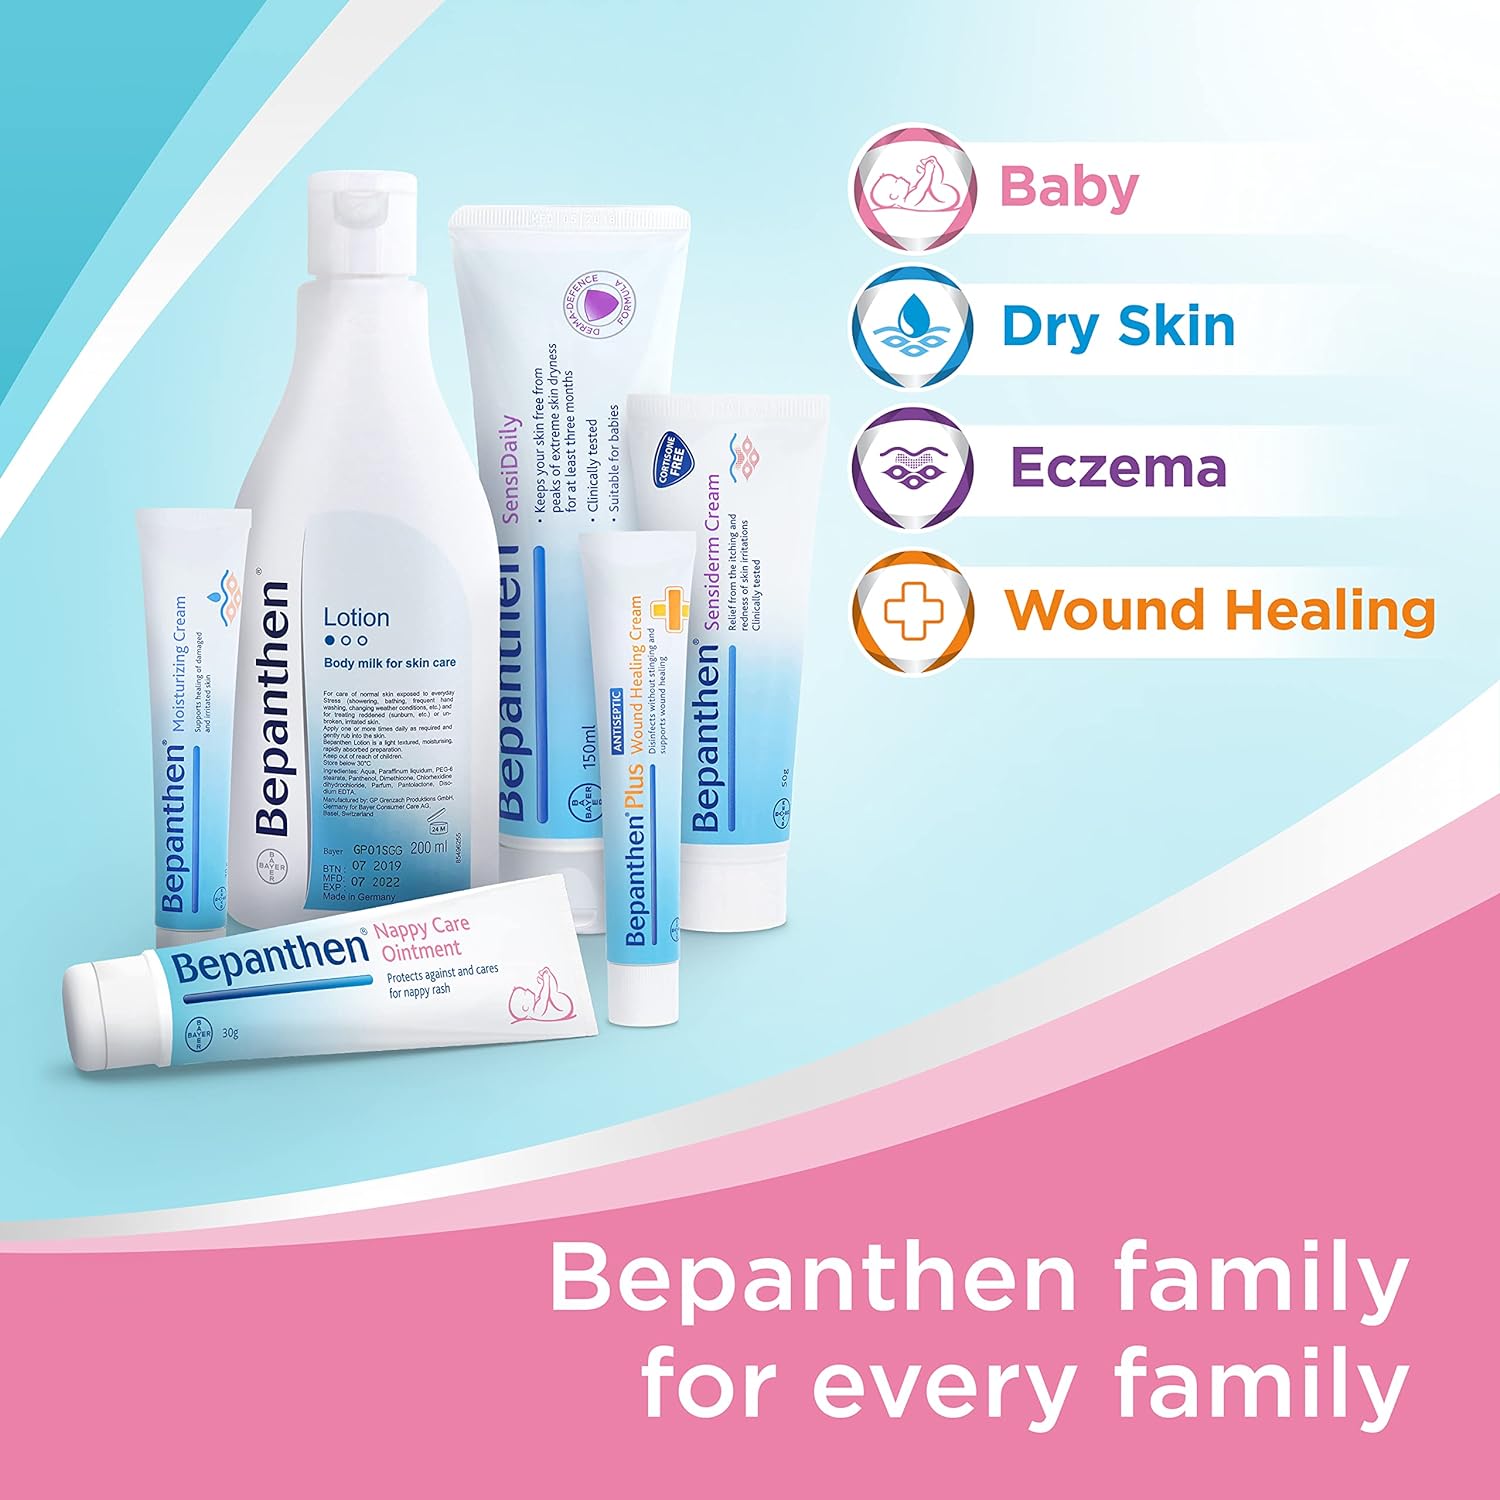 Bepanthen Protective Baby Ointment, Protects Against and Cares for Nappy Rash, 30g